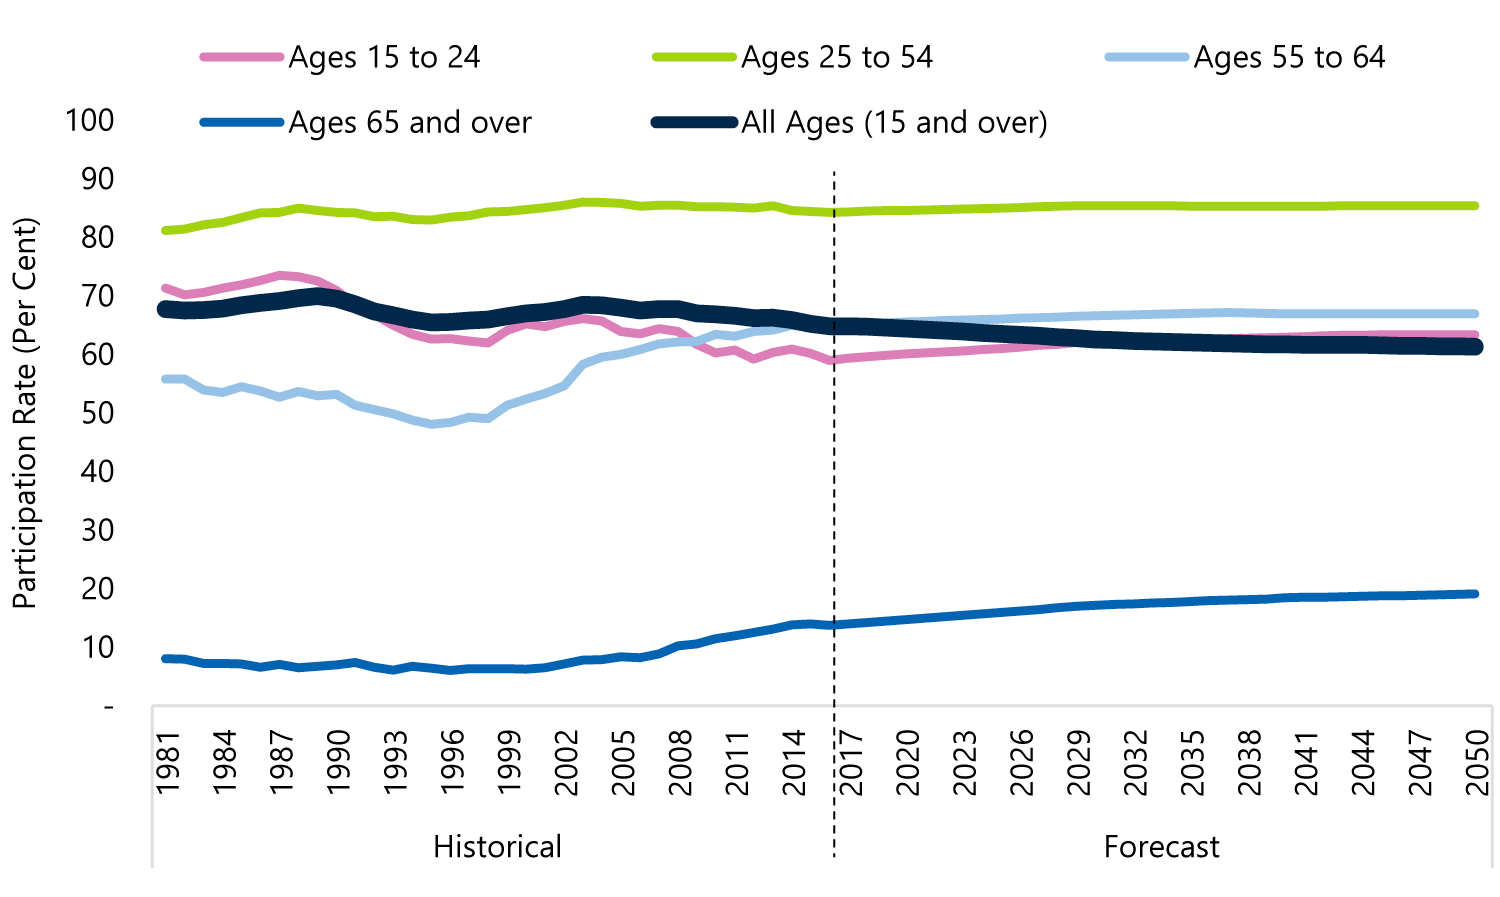 Participation rates by age group